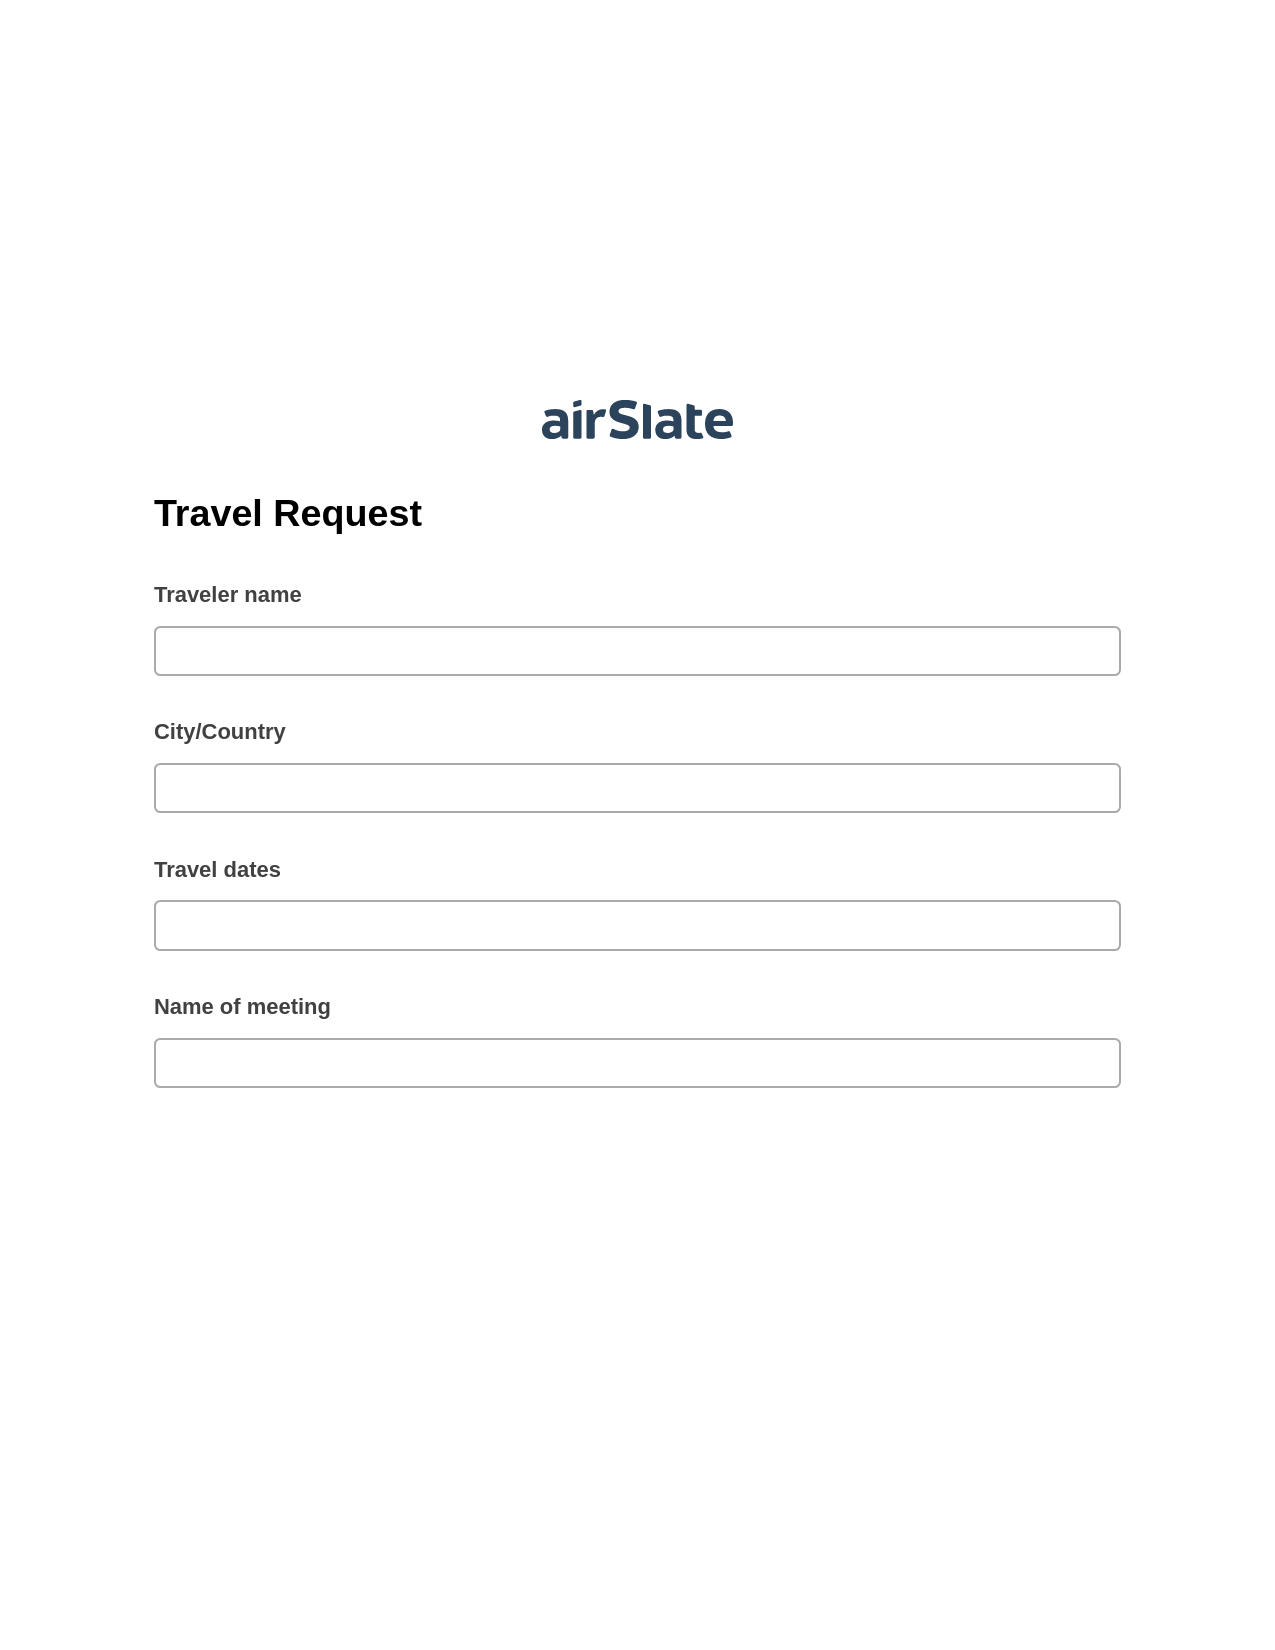 Travel Request Pre-fill Dropdowns from CSV File Bot, Reminder Bot, Export to Formstack Documents Bot